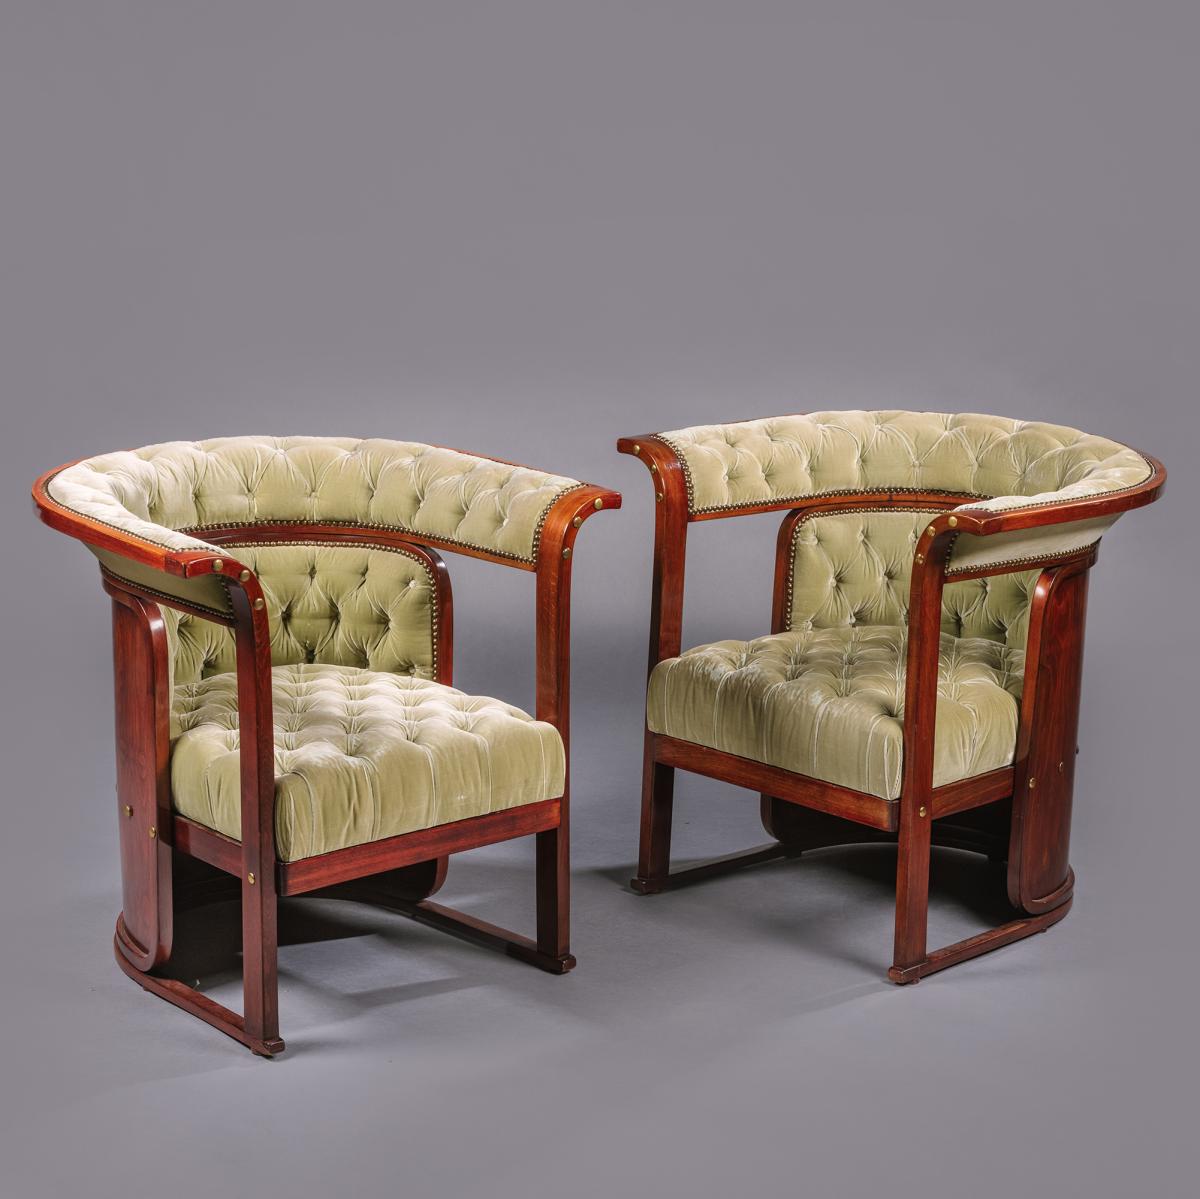 A Pair Of 'Buenos Aires' Armchairs By Jacob & Joseph Kohn Designed by Joseph Hoffman